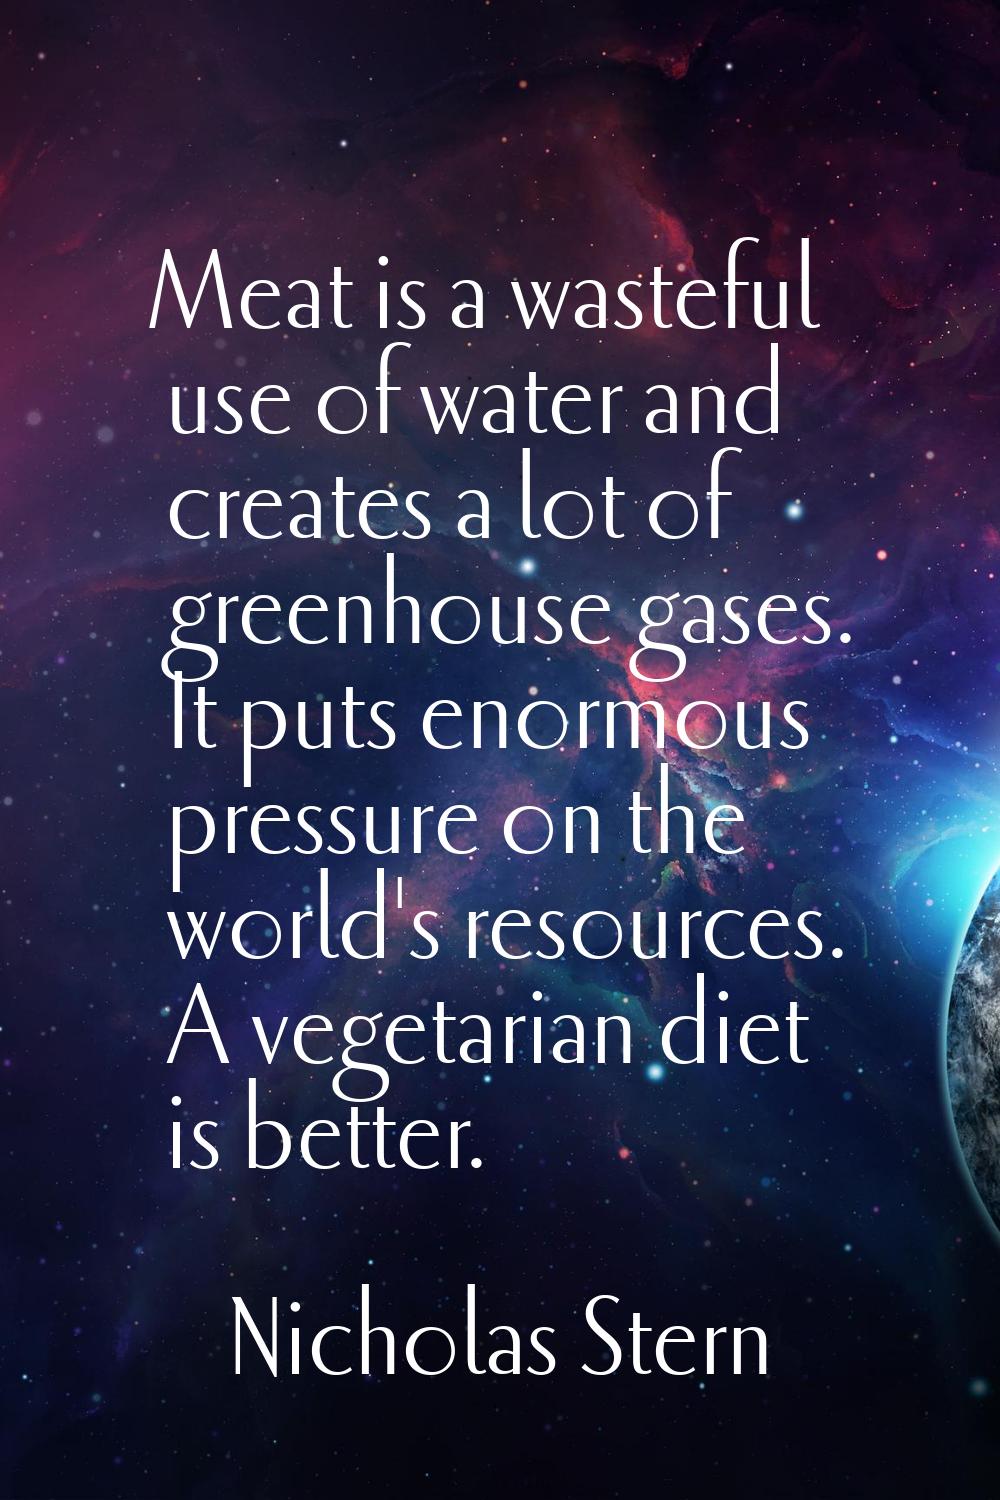 Meat is a wasteful use of water and creates a lot of greenhouse gases. It puts enormous pressure on